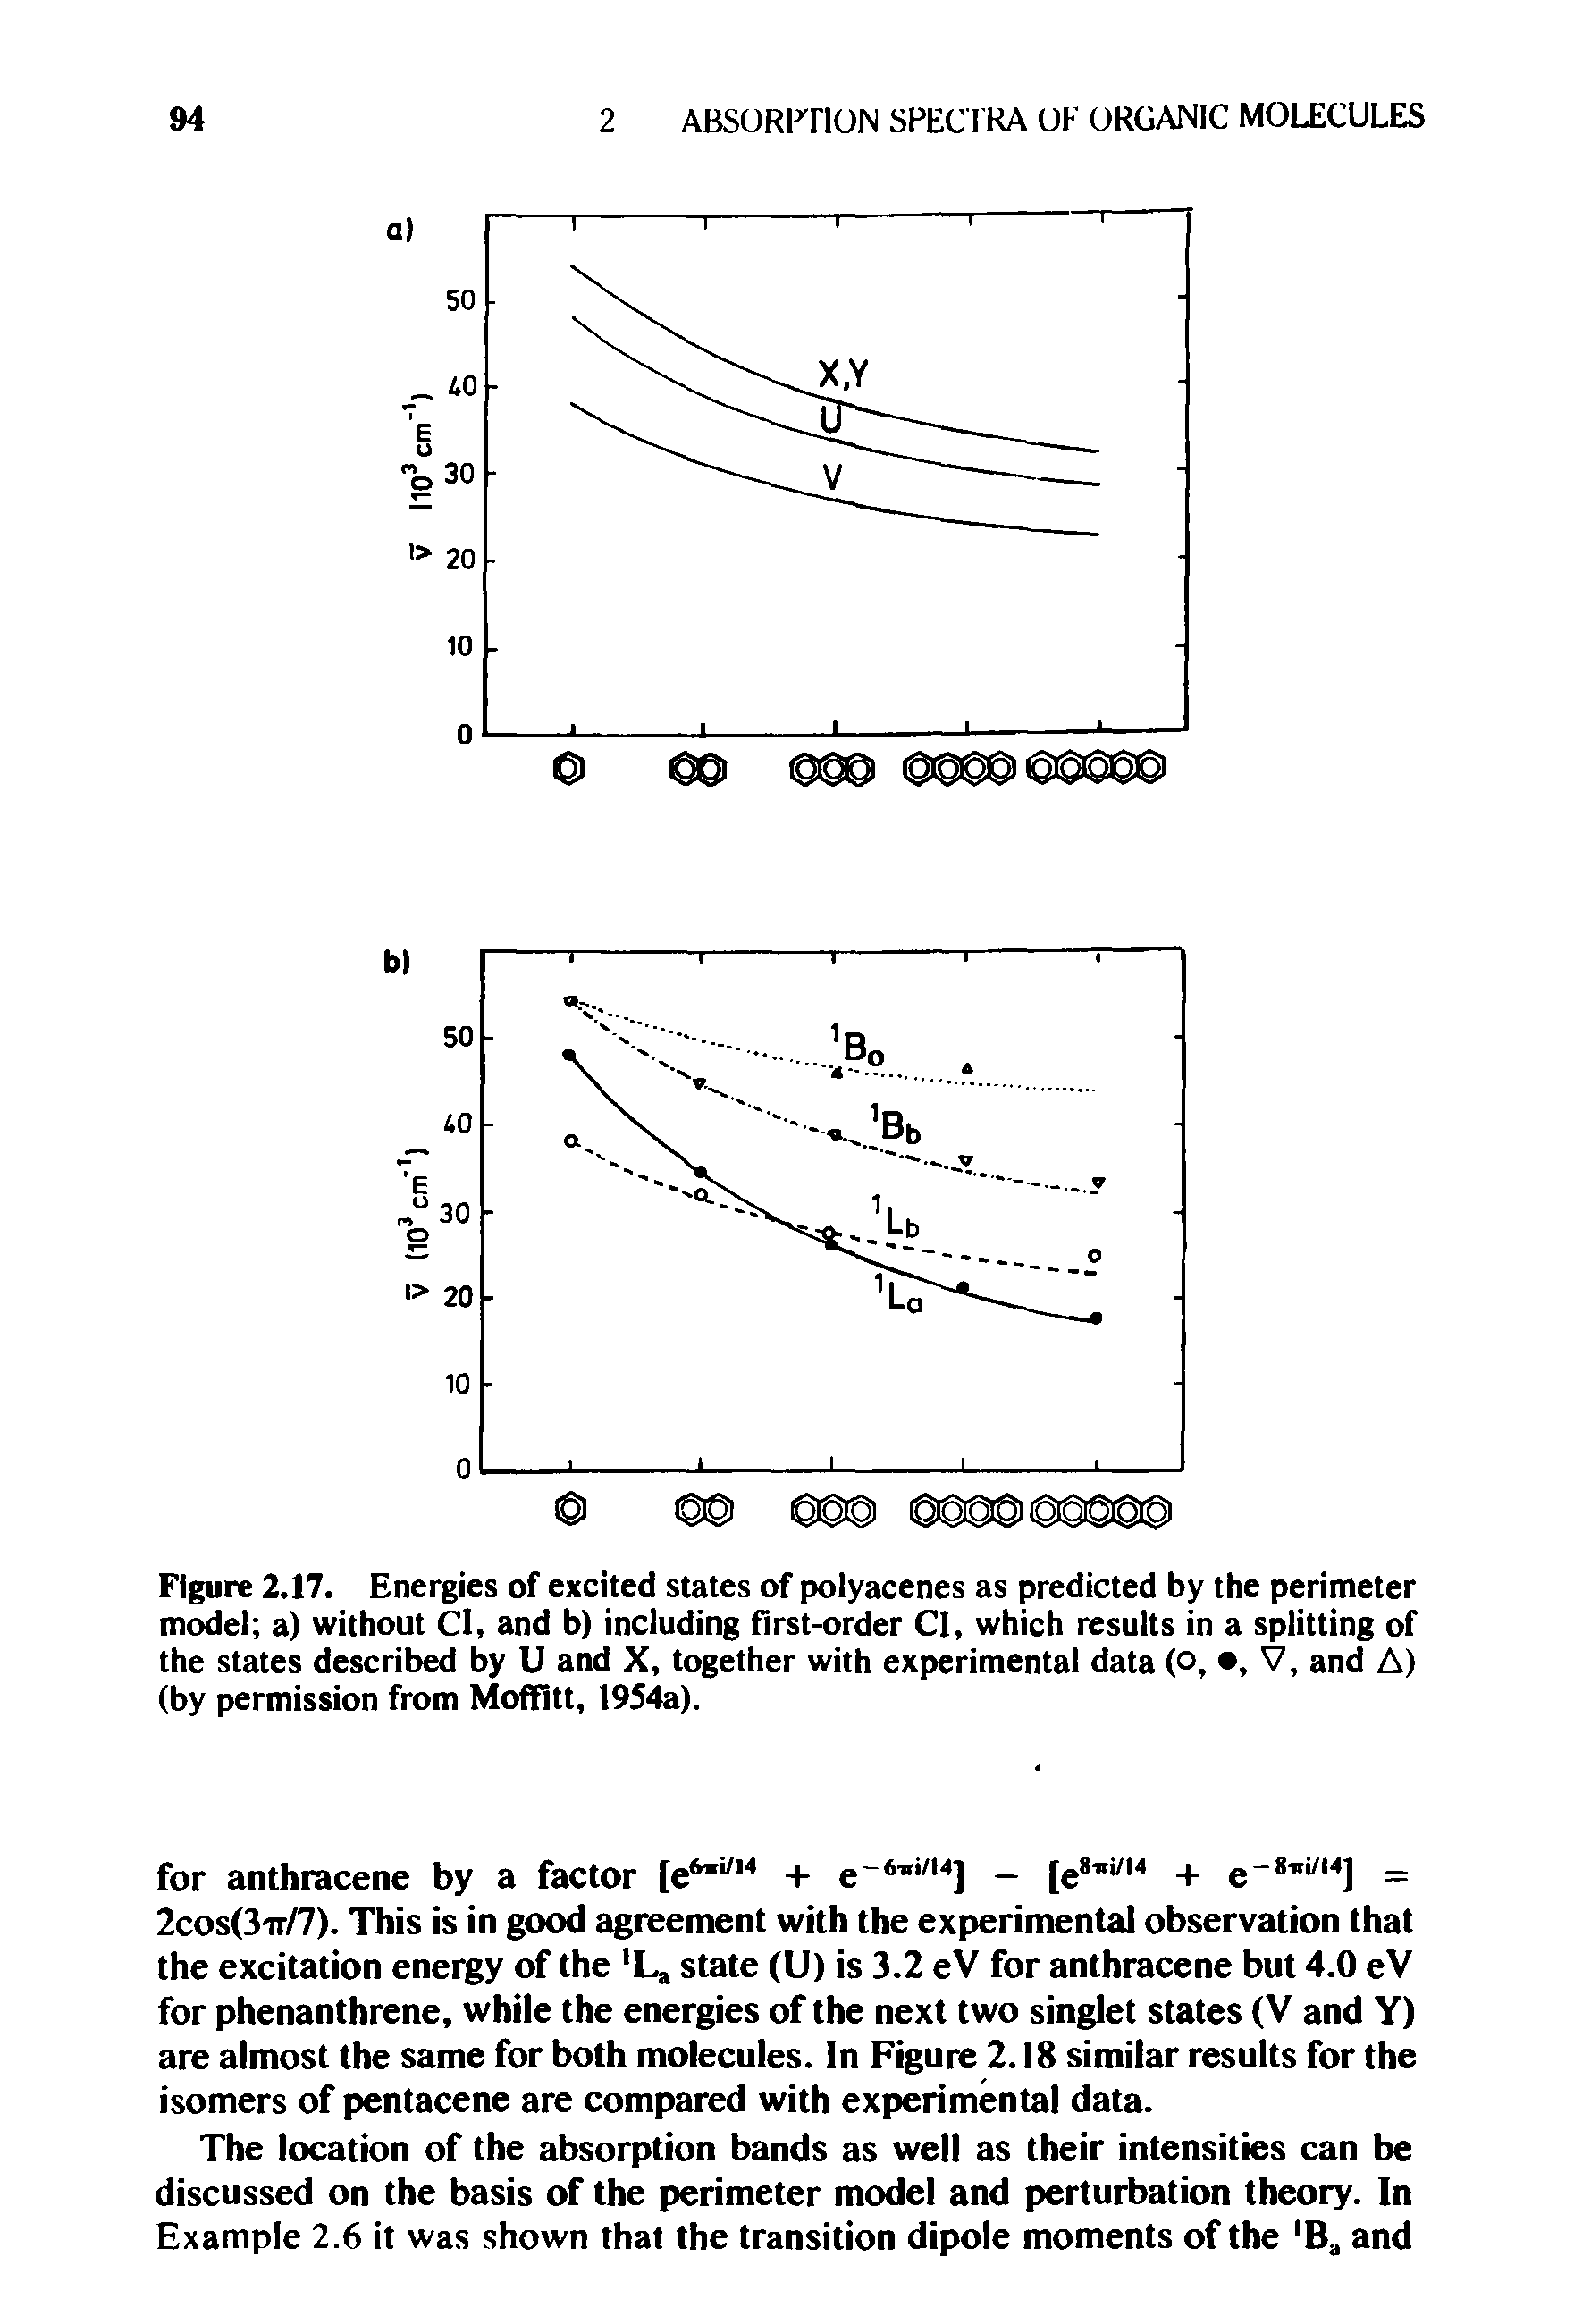 Figure 2.17. Energies of excited states of polyacenes as predicted by the perimeter model a) without Cl, and b) including first-order Cl, which results in a splitting of the states described by U and X, together with experimental data (o, , V, and A) (by permission from Moffitt, 1954a).